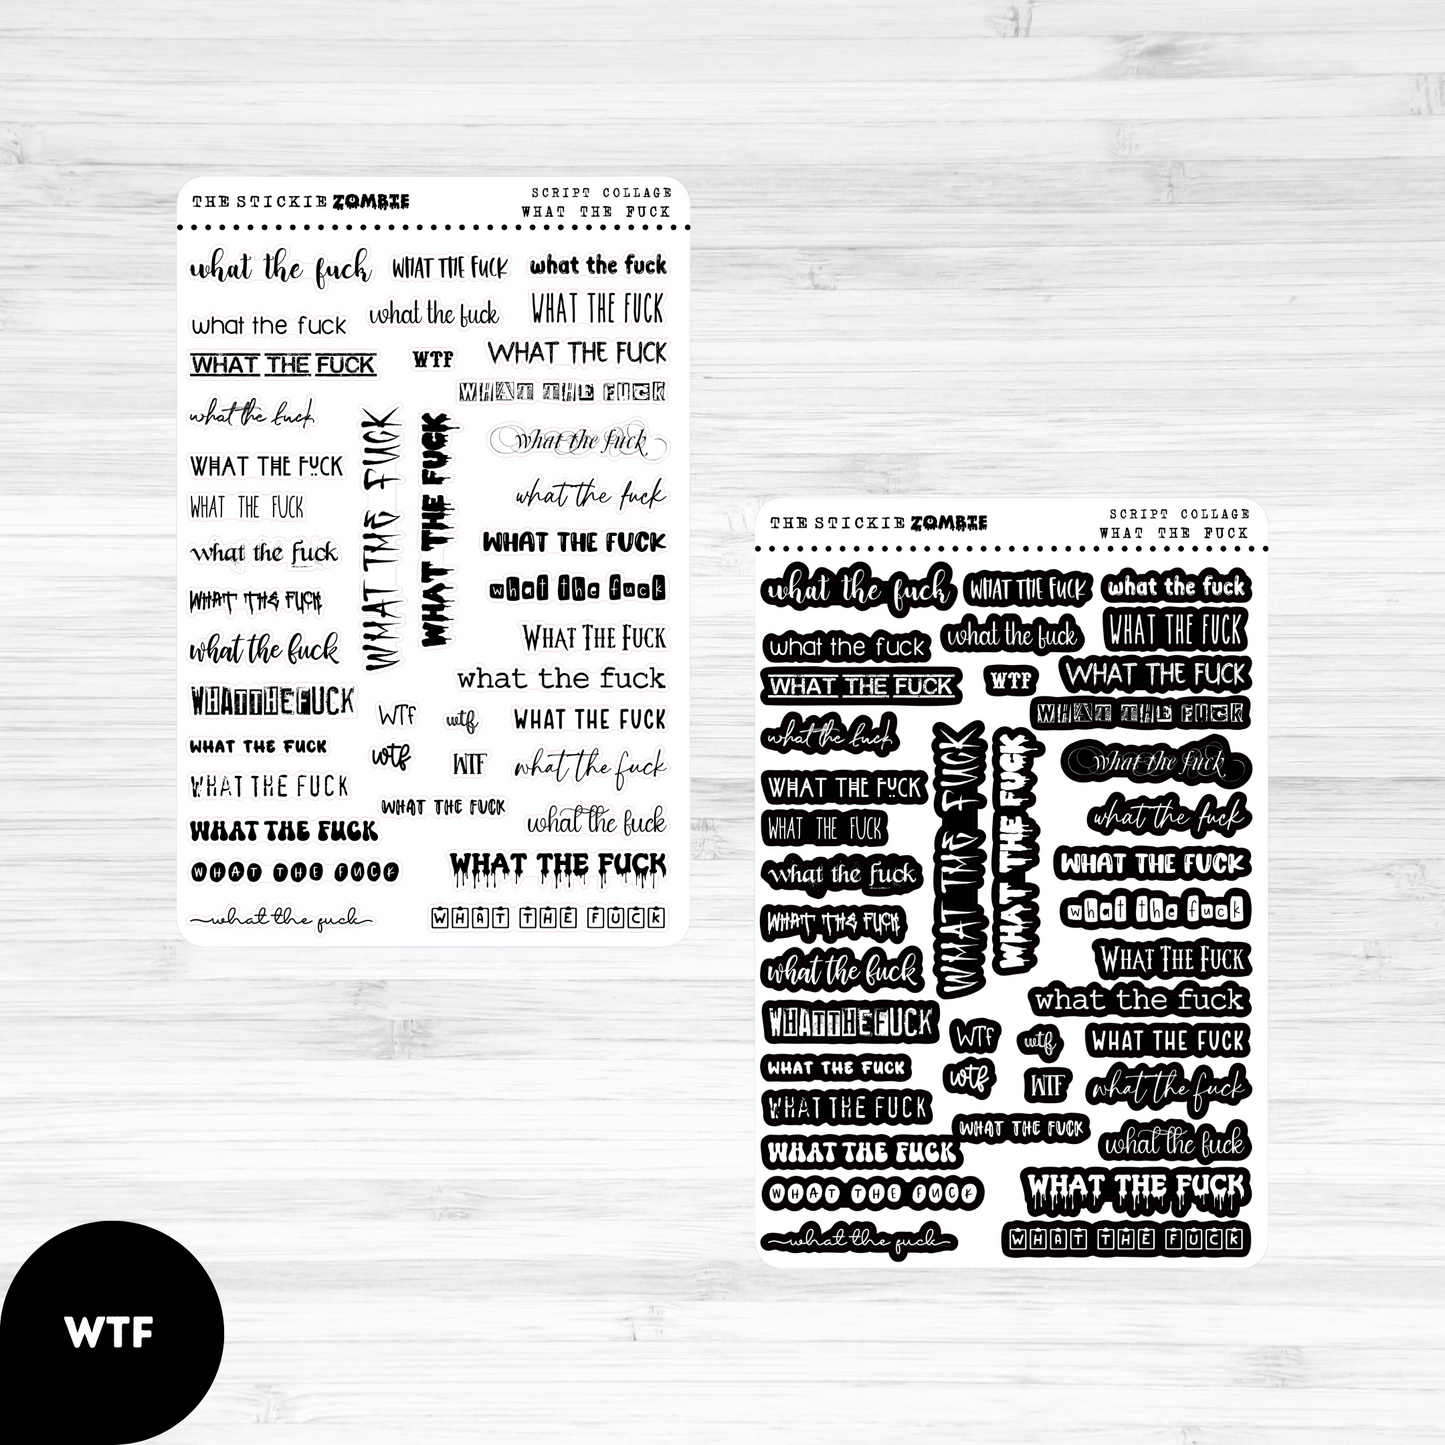 Script Words / Collage / What The Fuck